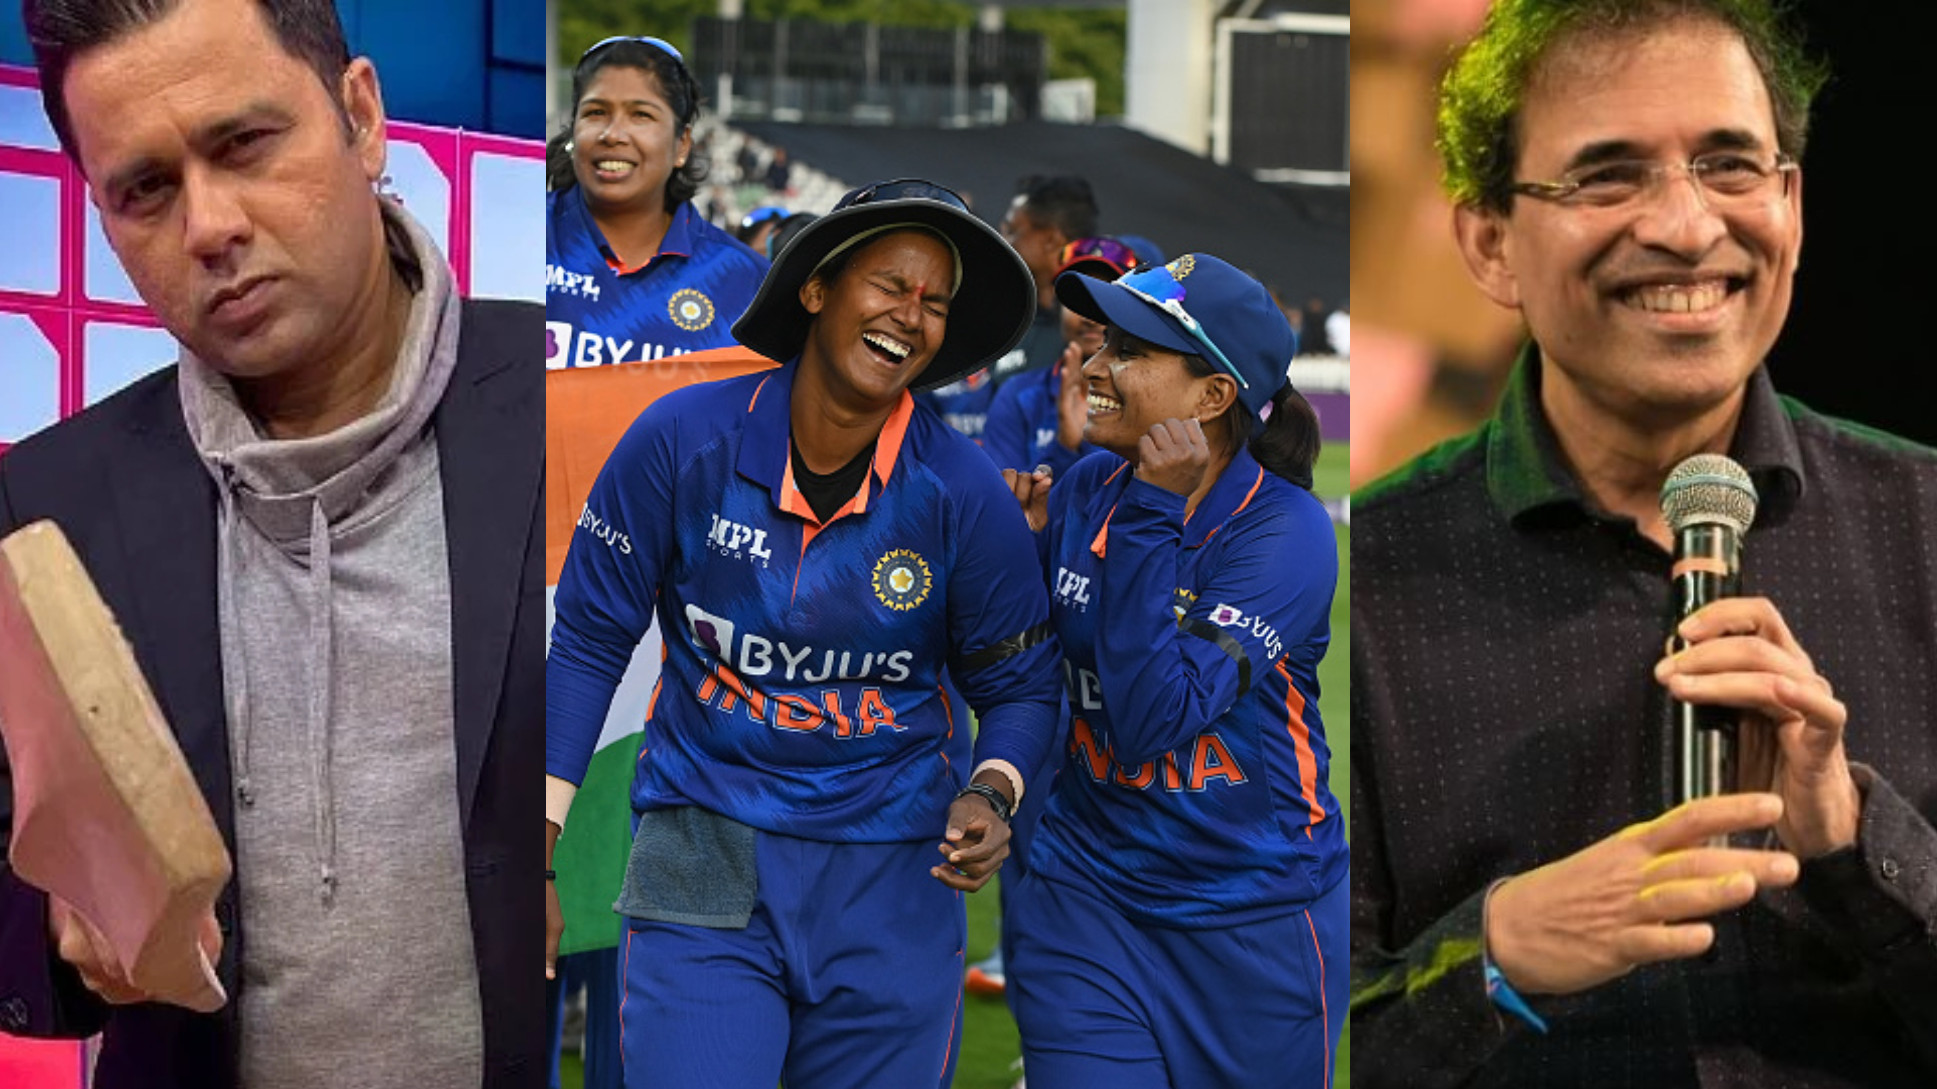 ENGW v INDW 2022: Indian cricket fraternity comes in support of Deepti Sharma after Charlie Dean's run-out incident